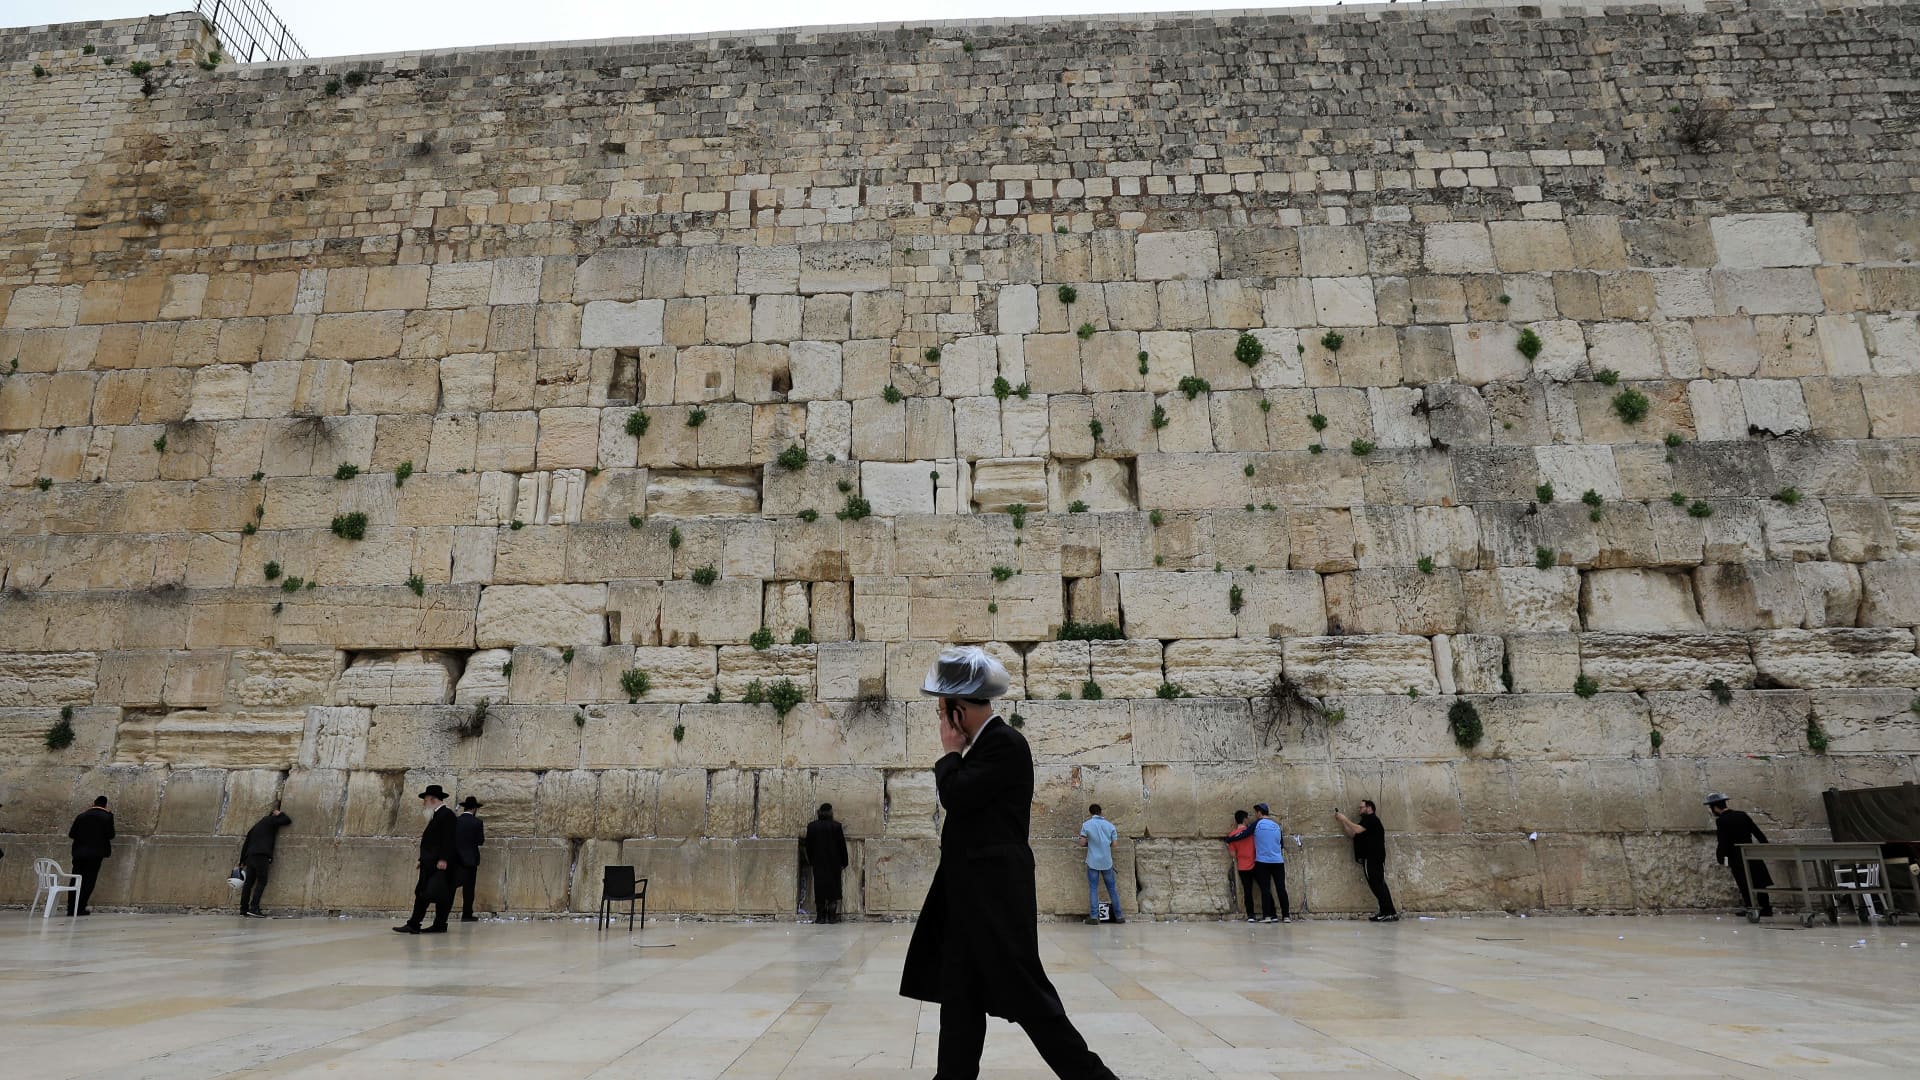 About 10% of the original Western Wall is visible today, with most buried behind construction in the Old City's Muslim Quarter as well as beneath the ground.